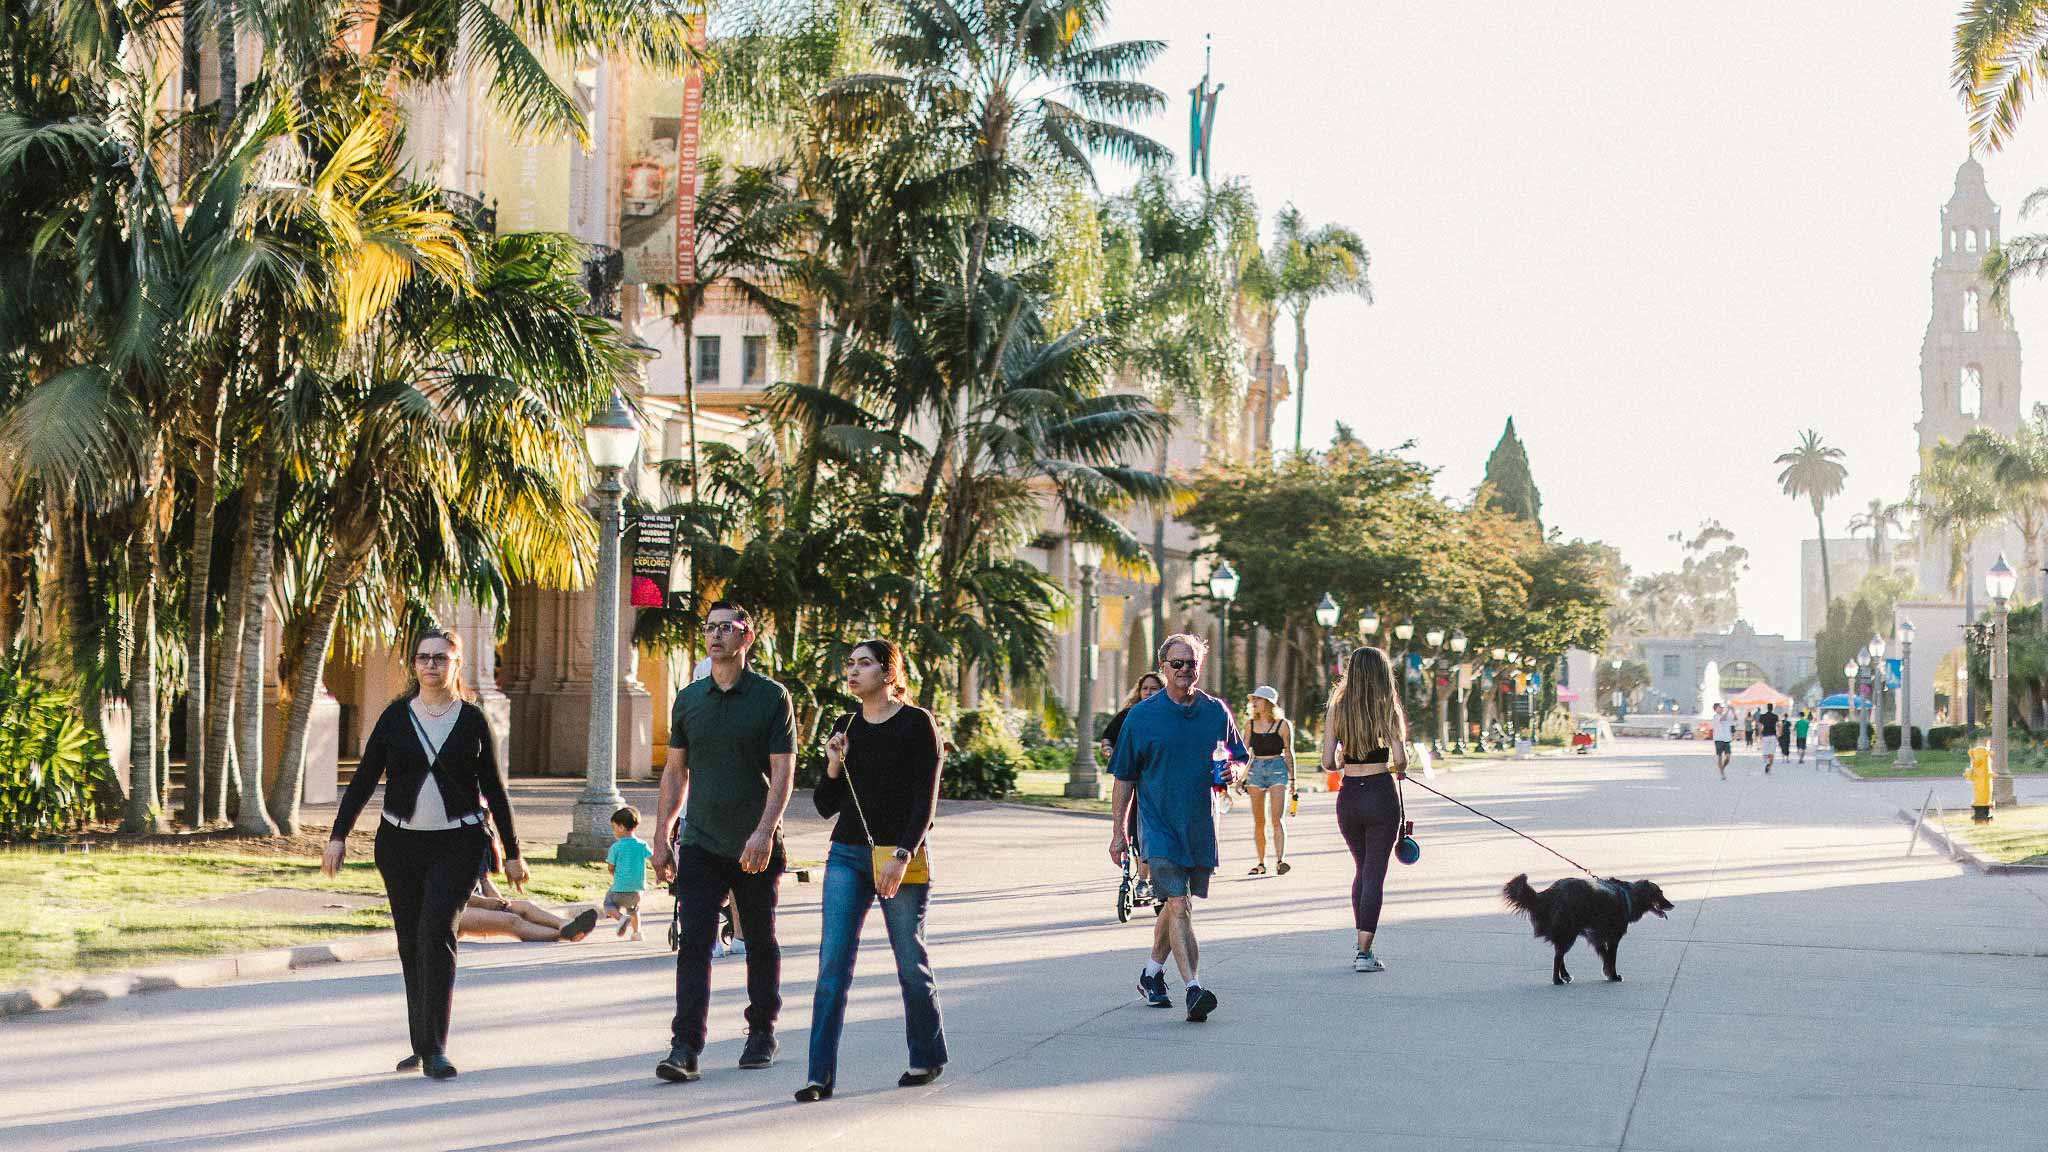 People walking through Balboa Park on a sunny day